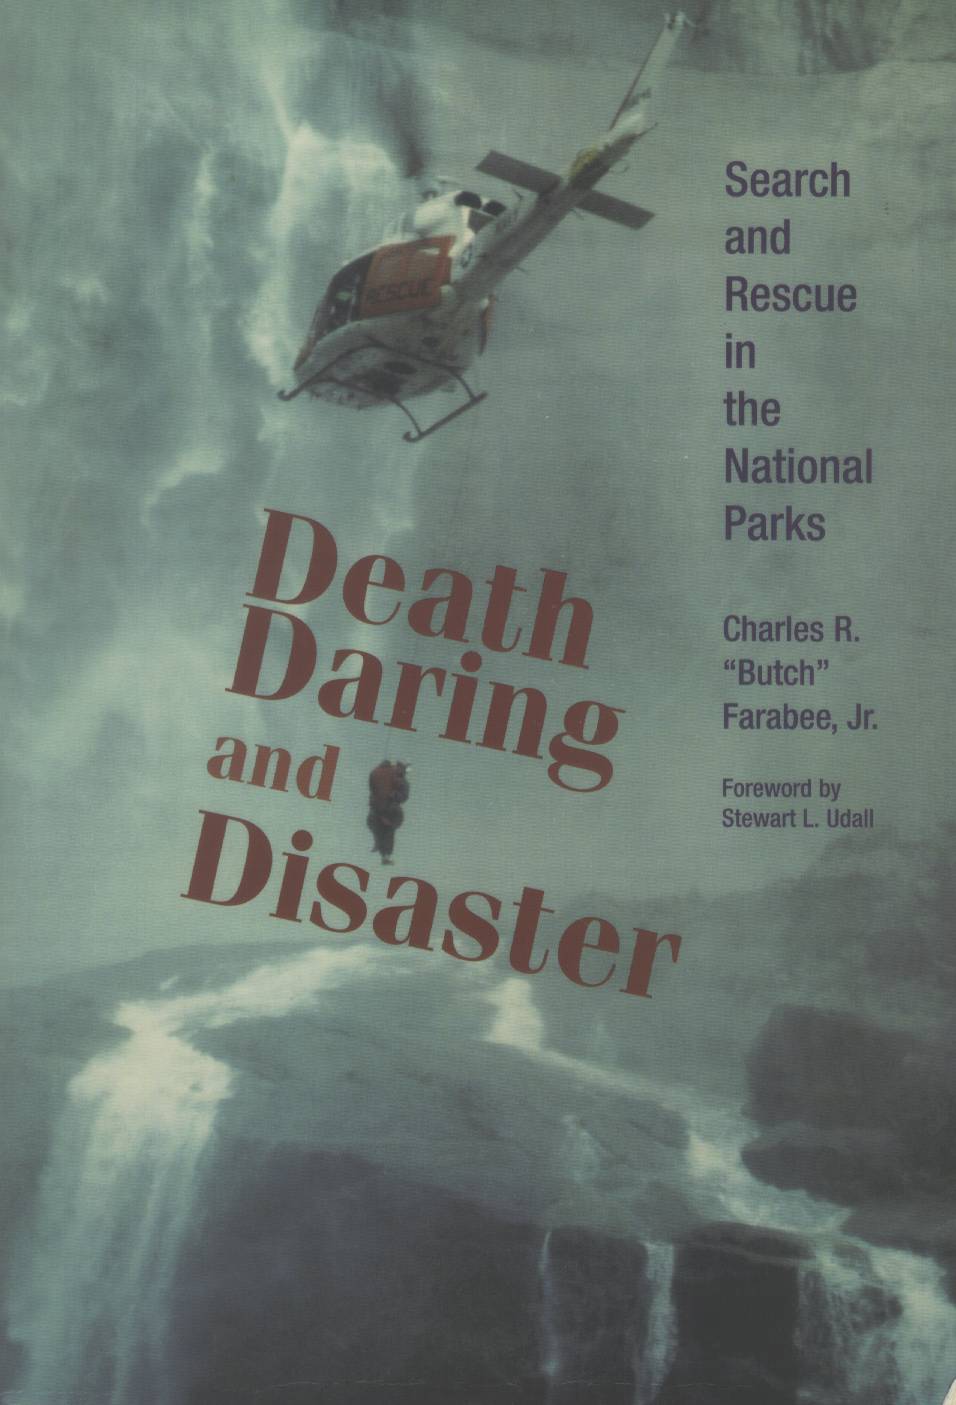 DEATH, DARING, AND DISASTER: search and rescue in the national parks.